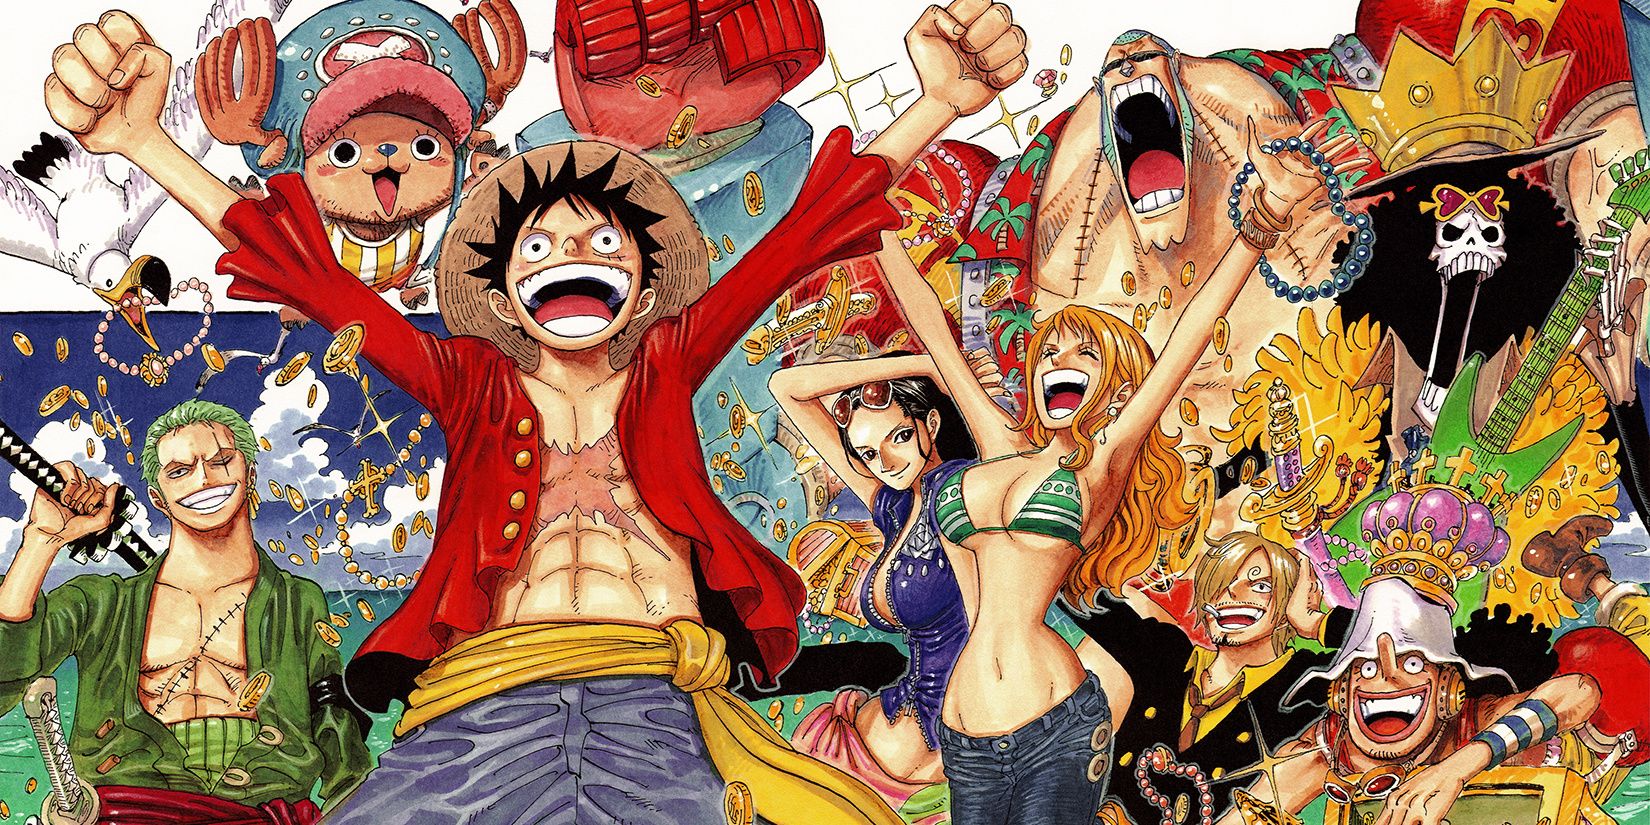 The characters of One Piece assembled into a collage